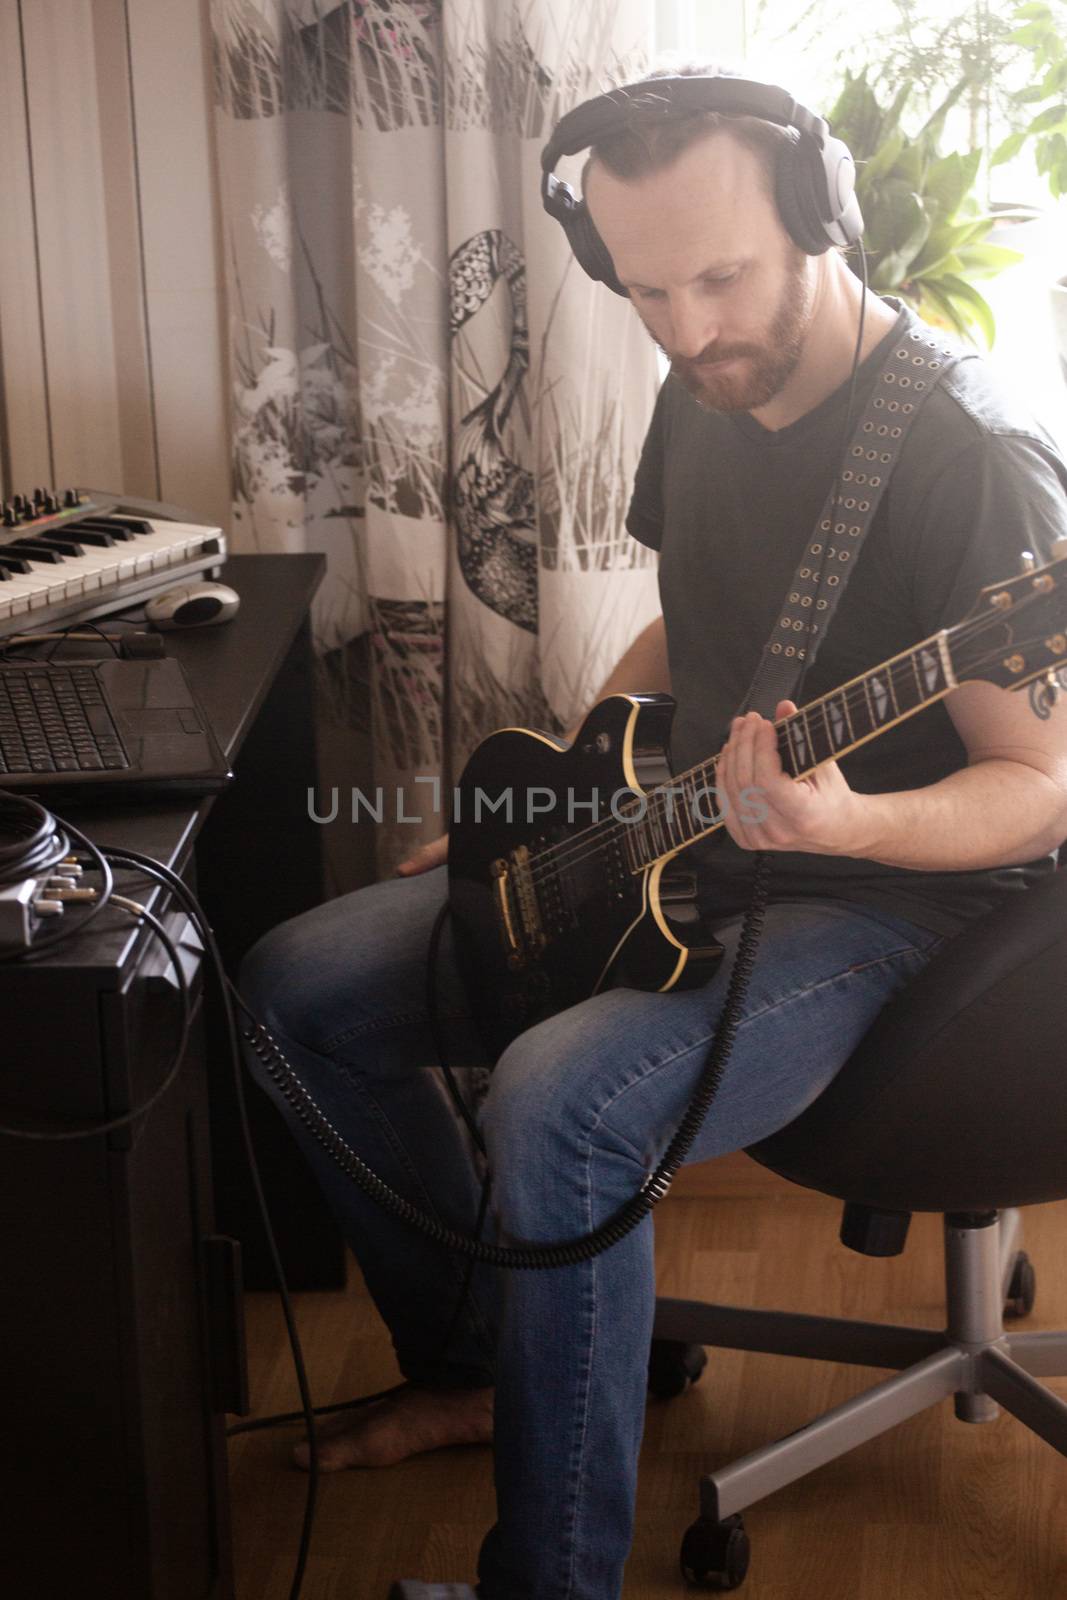 Bearded man musician playing music and composing a song with electric guitar piano and laptop computer while sitting in living room, corona virus quarantine stay home concept